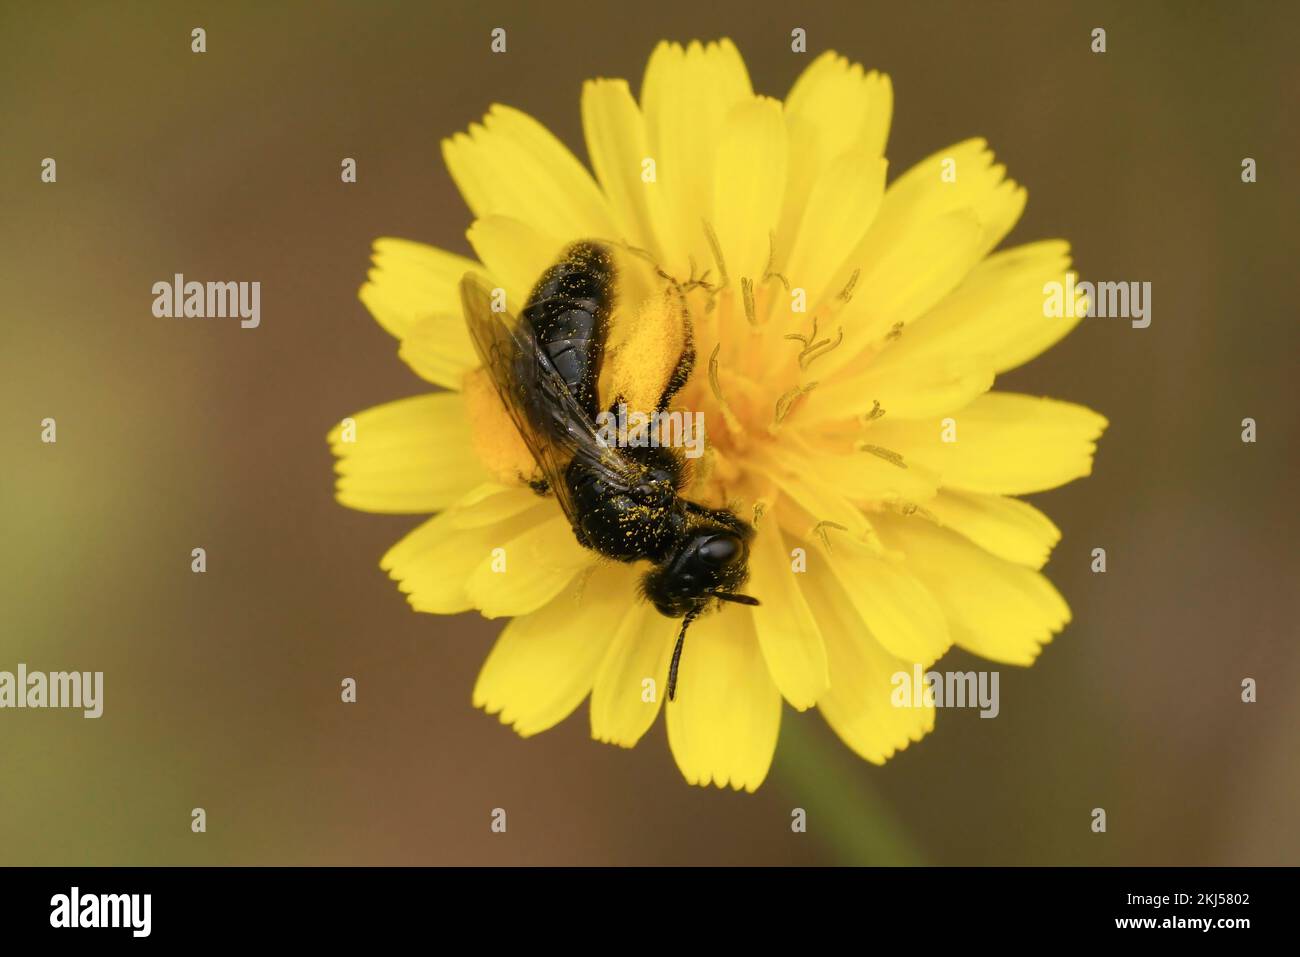 Natural closeup on a small dark shaggy solitary bee, Panurgus banksianus , sitting on a yellow flower Stock Photo